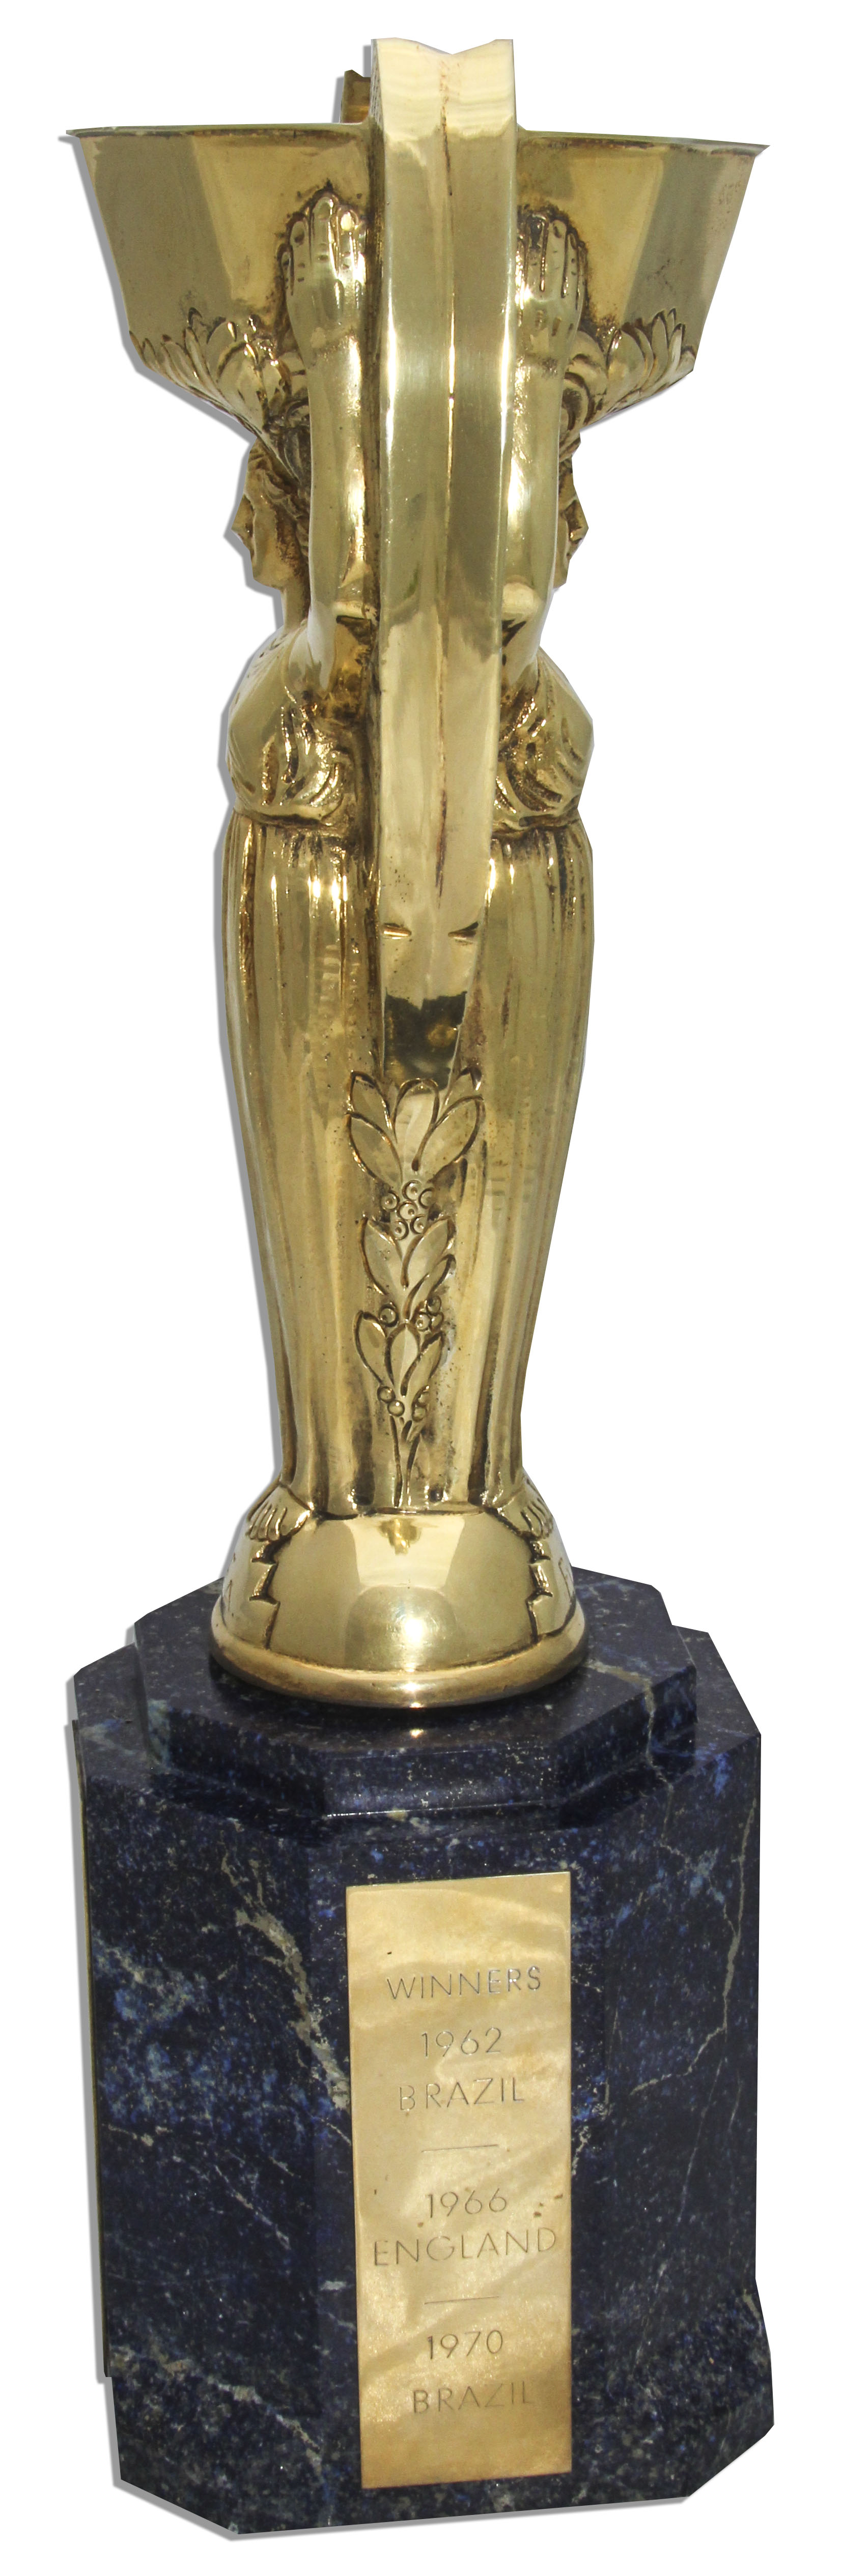 Lot Detail Rare Jules Rimet Fifa World Cup Trophy From 1970 Made